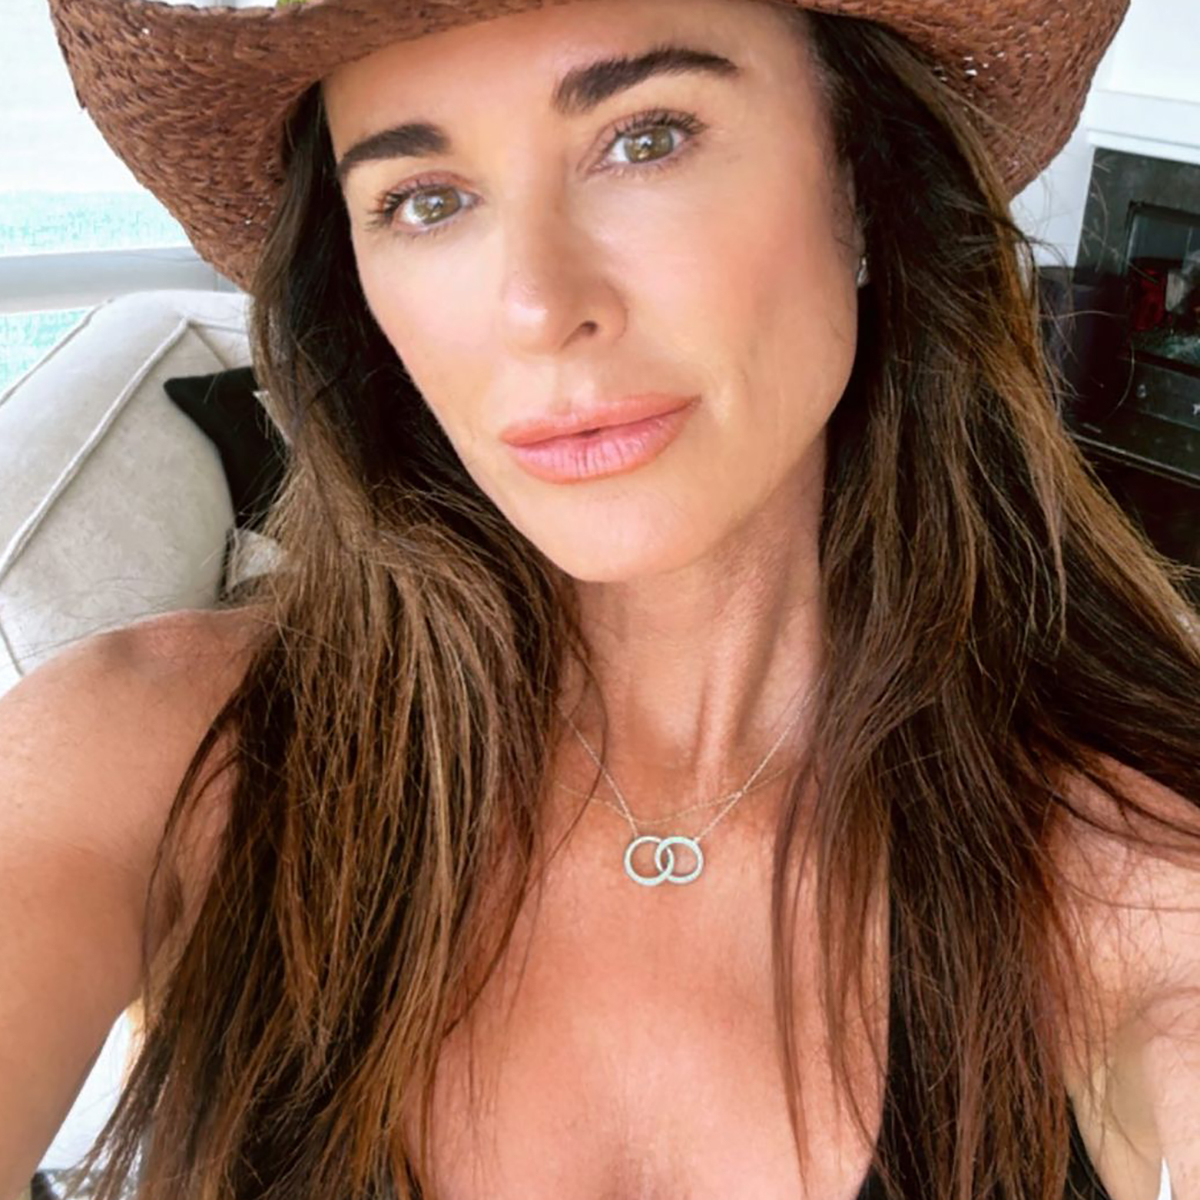 RHOBH’s Kyle Richards Celebrates One Year of Being Alcohol-Free